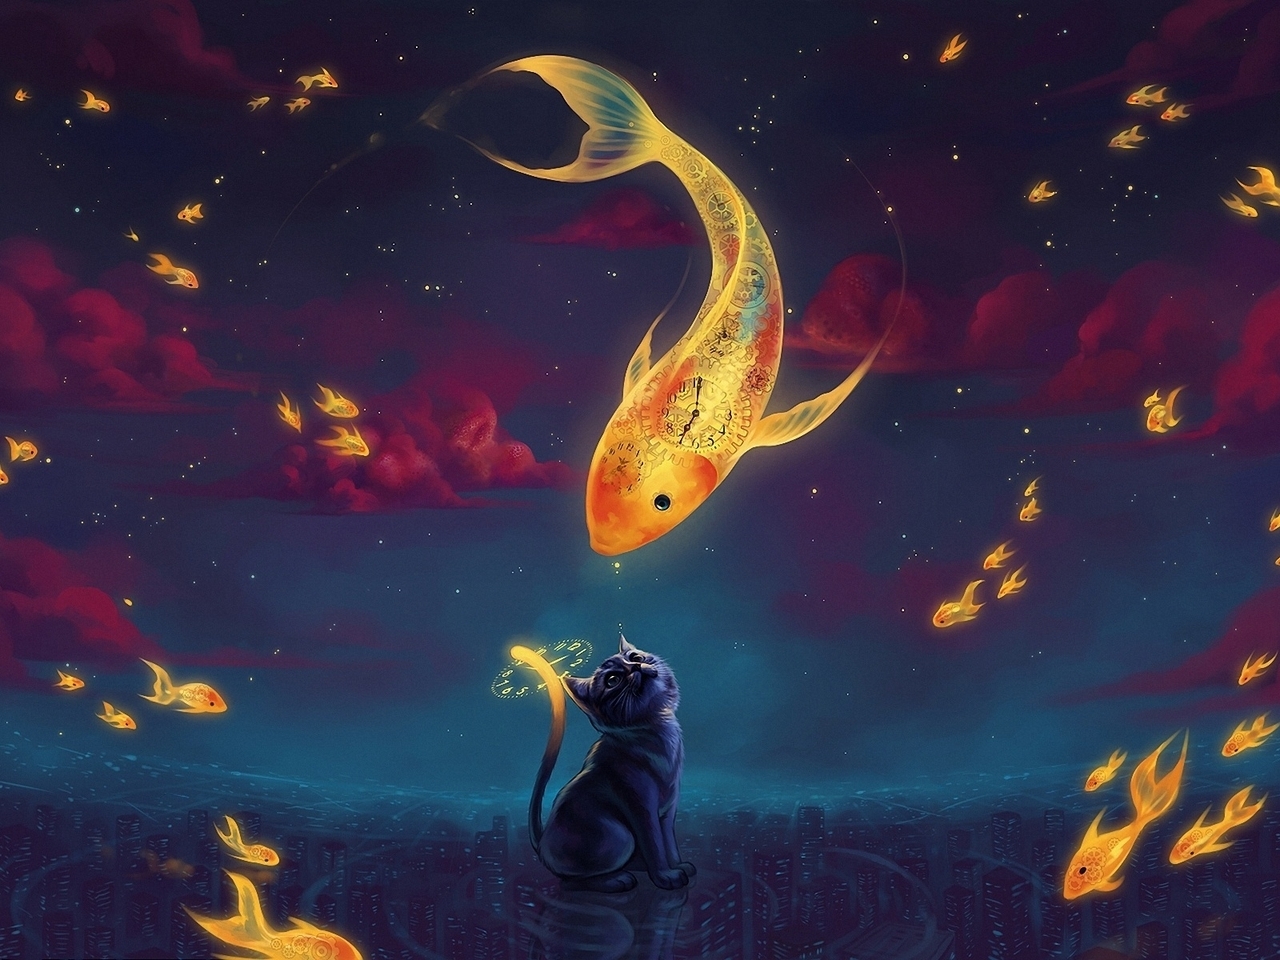 Image: Cat, fish, gold, watch, clouds, sky, building